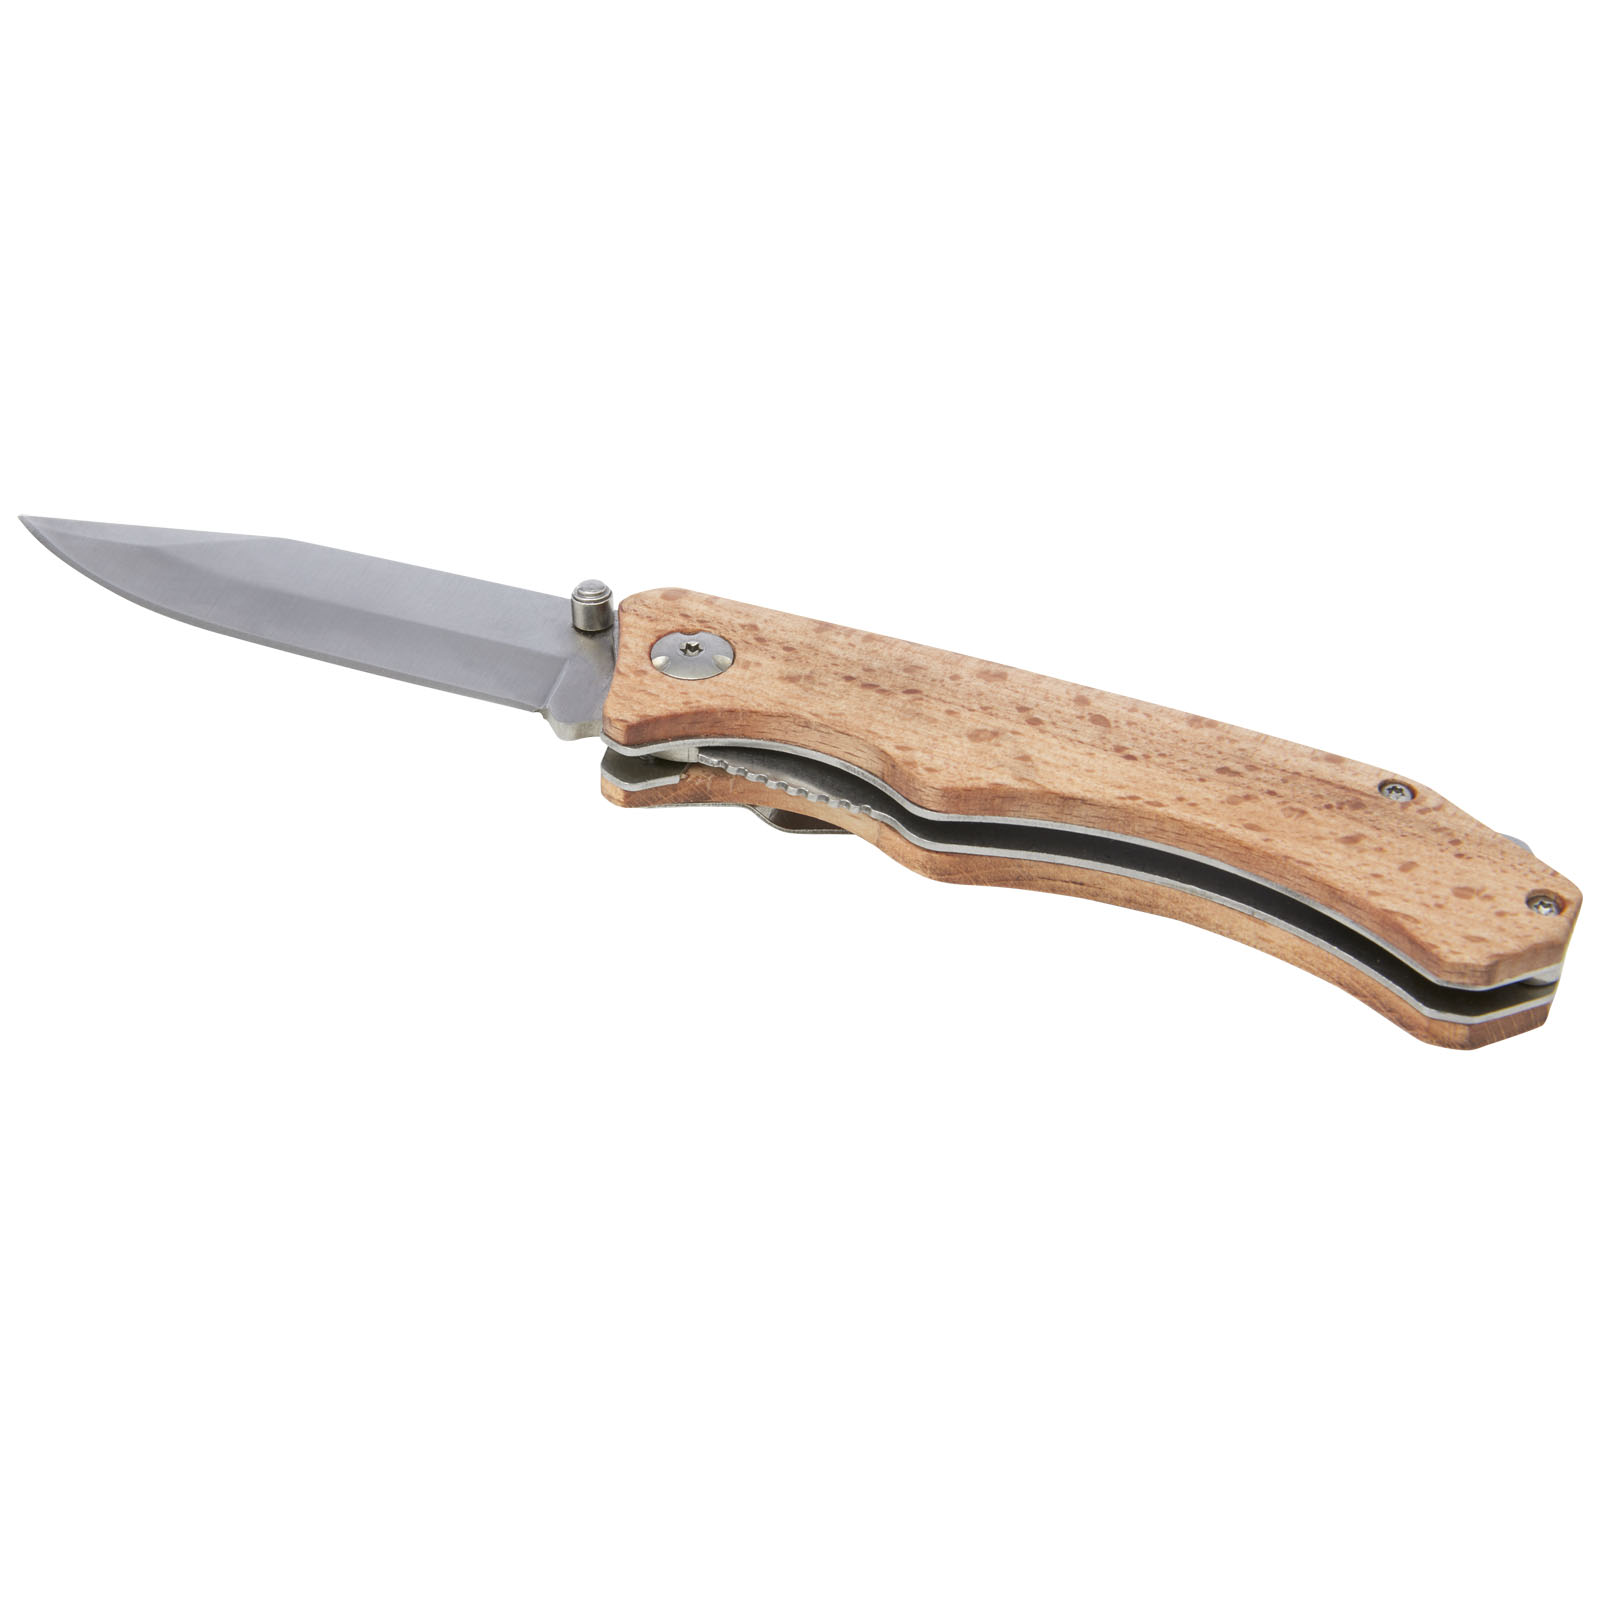 Metal pocket knife with wooden surface MARISOL - wood